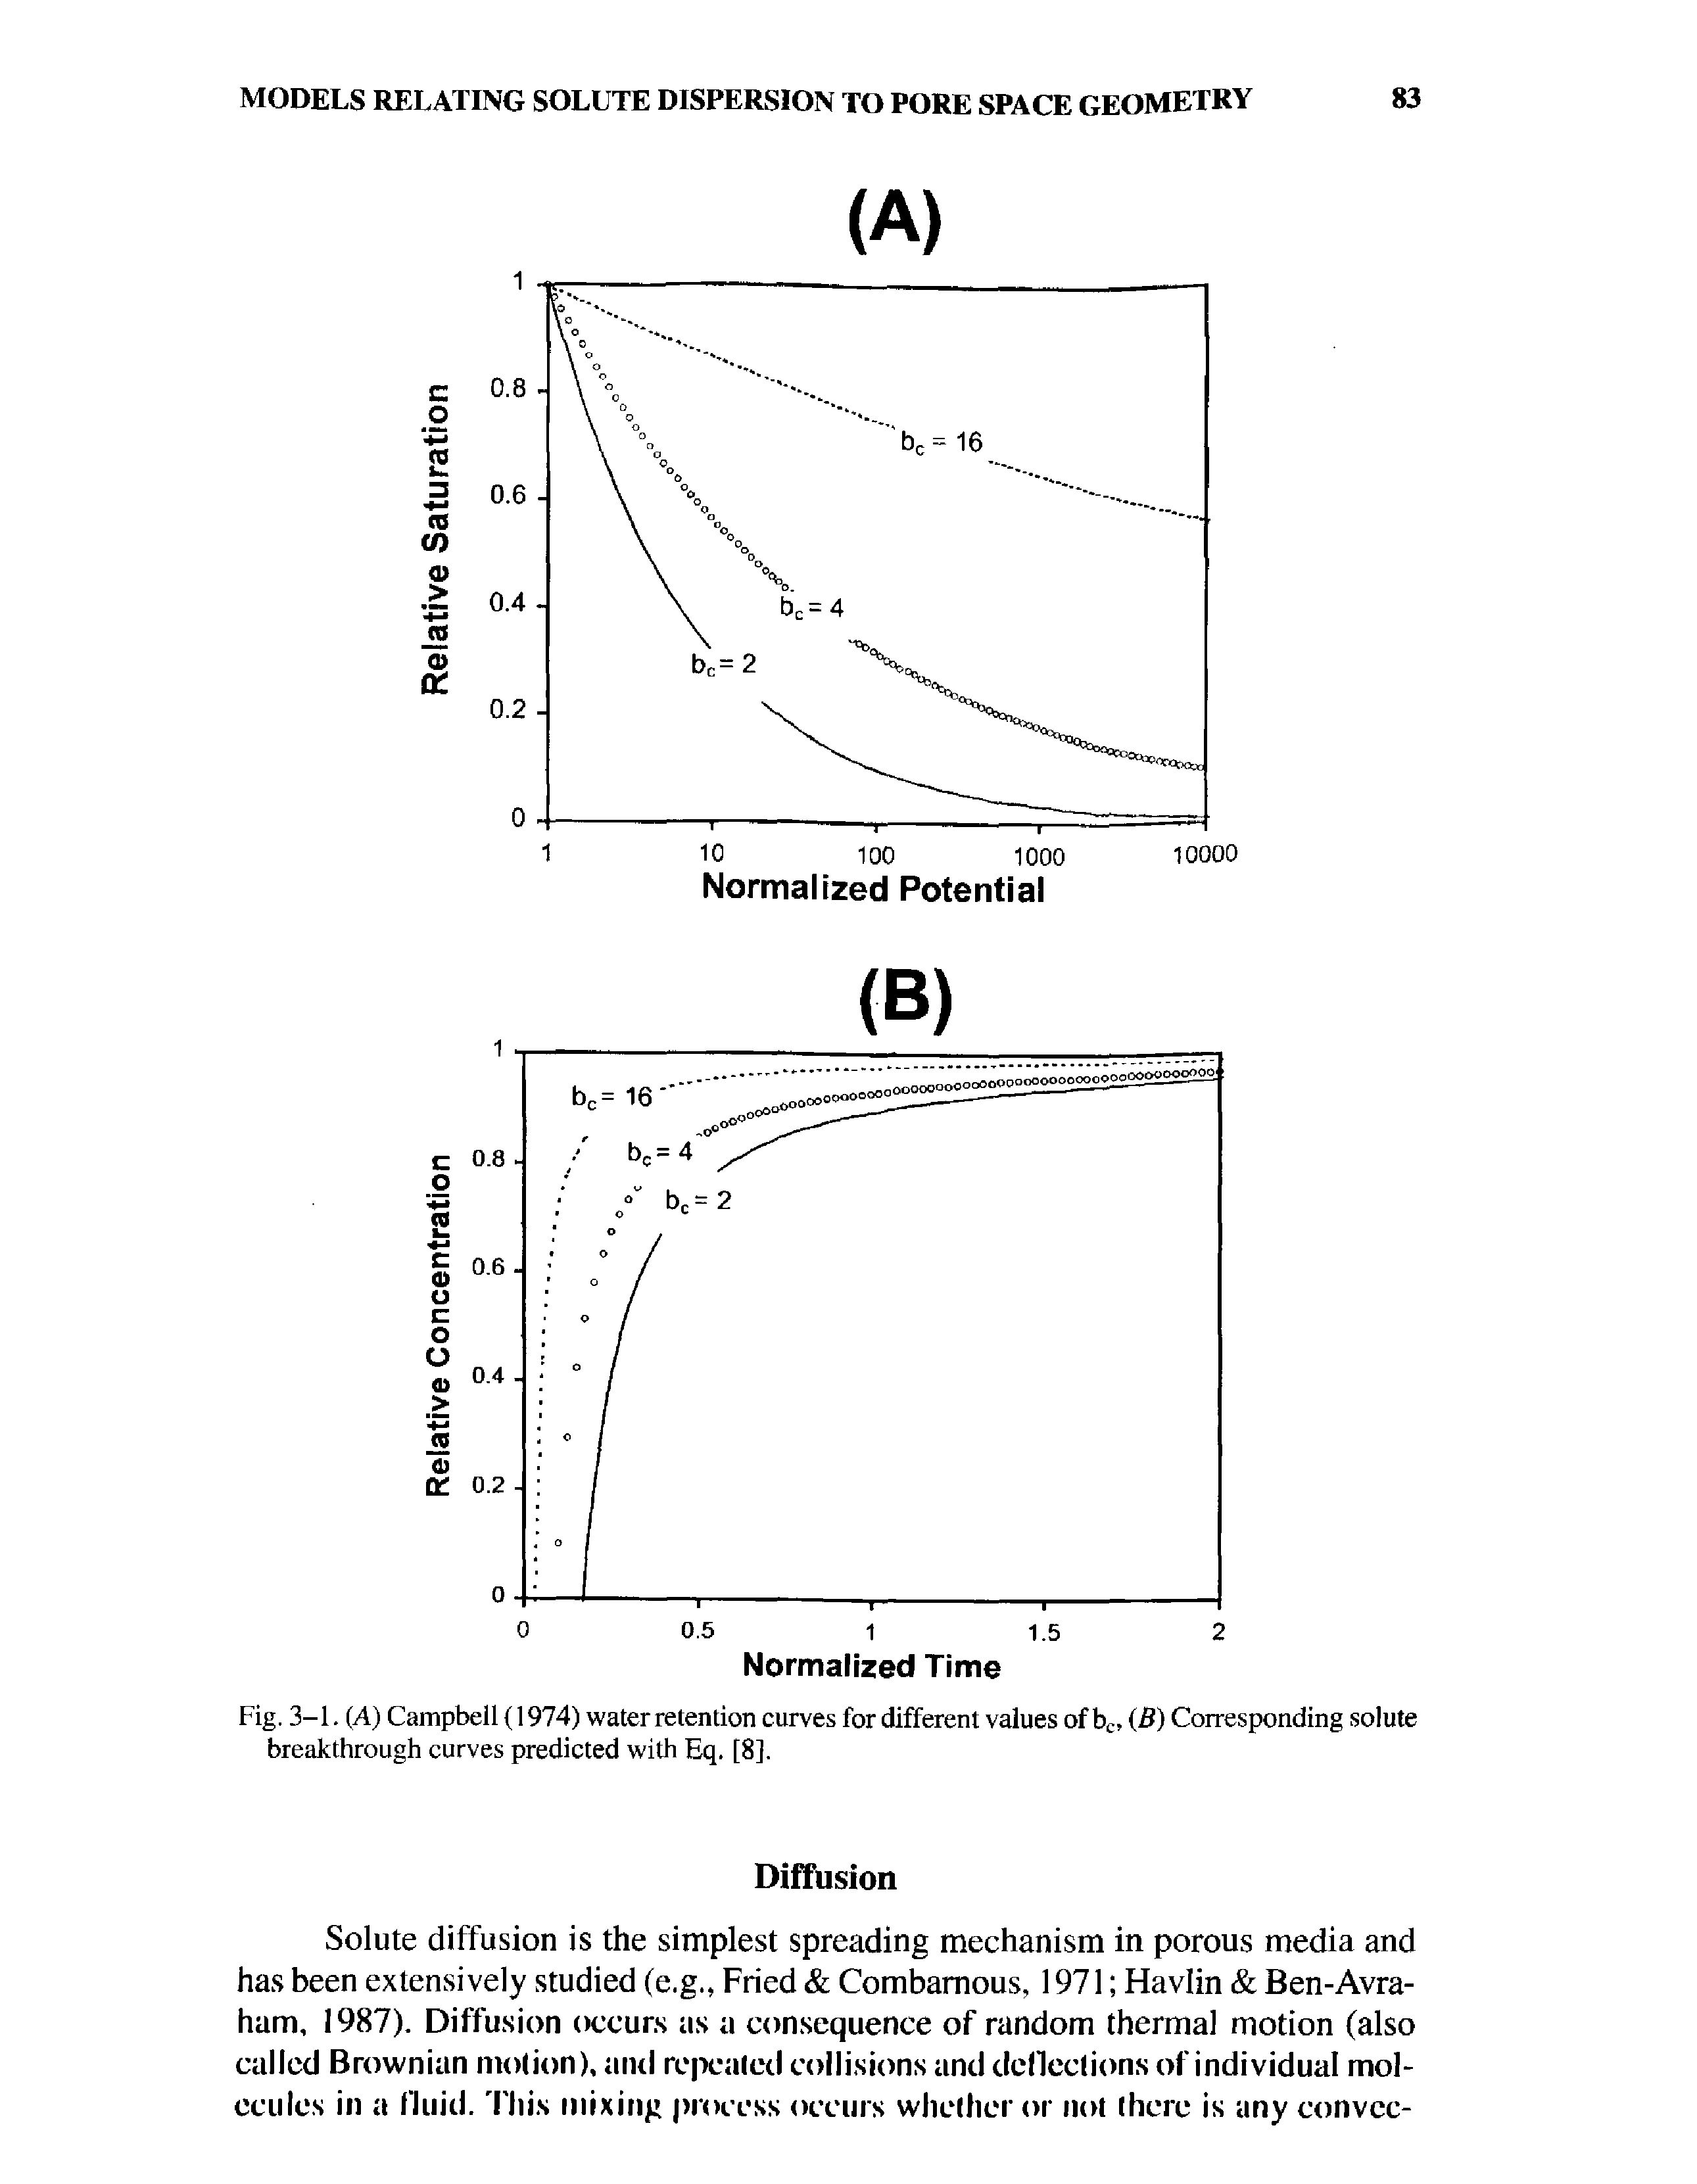 Fig. 3-1. (A) Campbell (1974) water retention curves for different values of be, (B) Corresponding solute breakthrough curves predicted with Eq. [8].